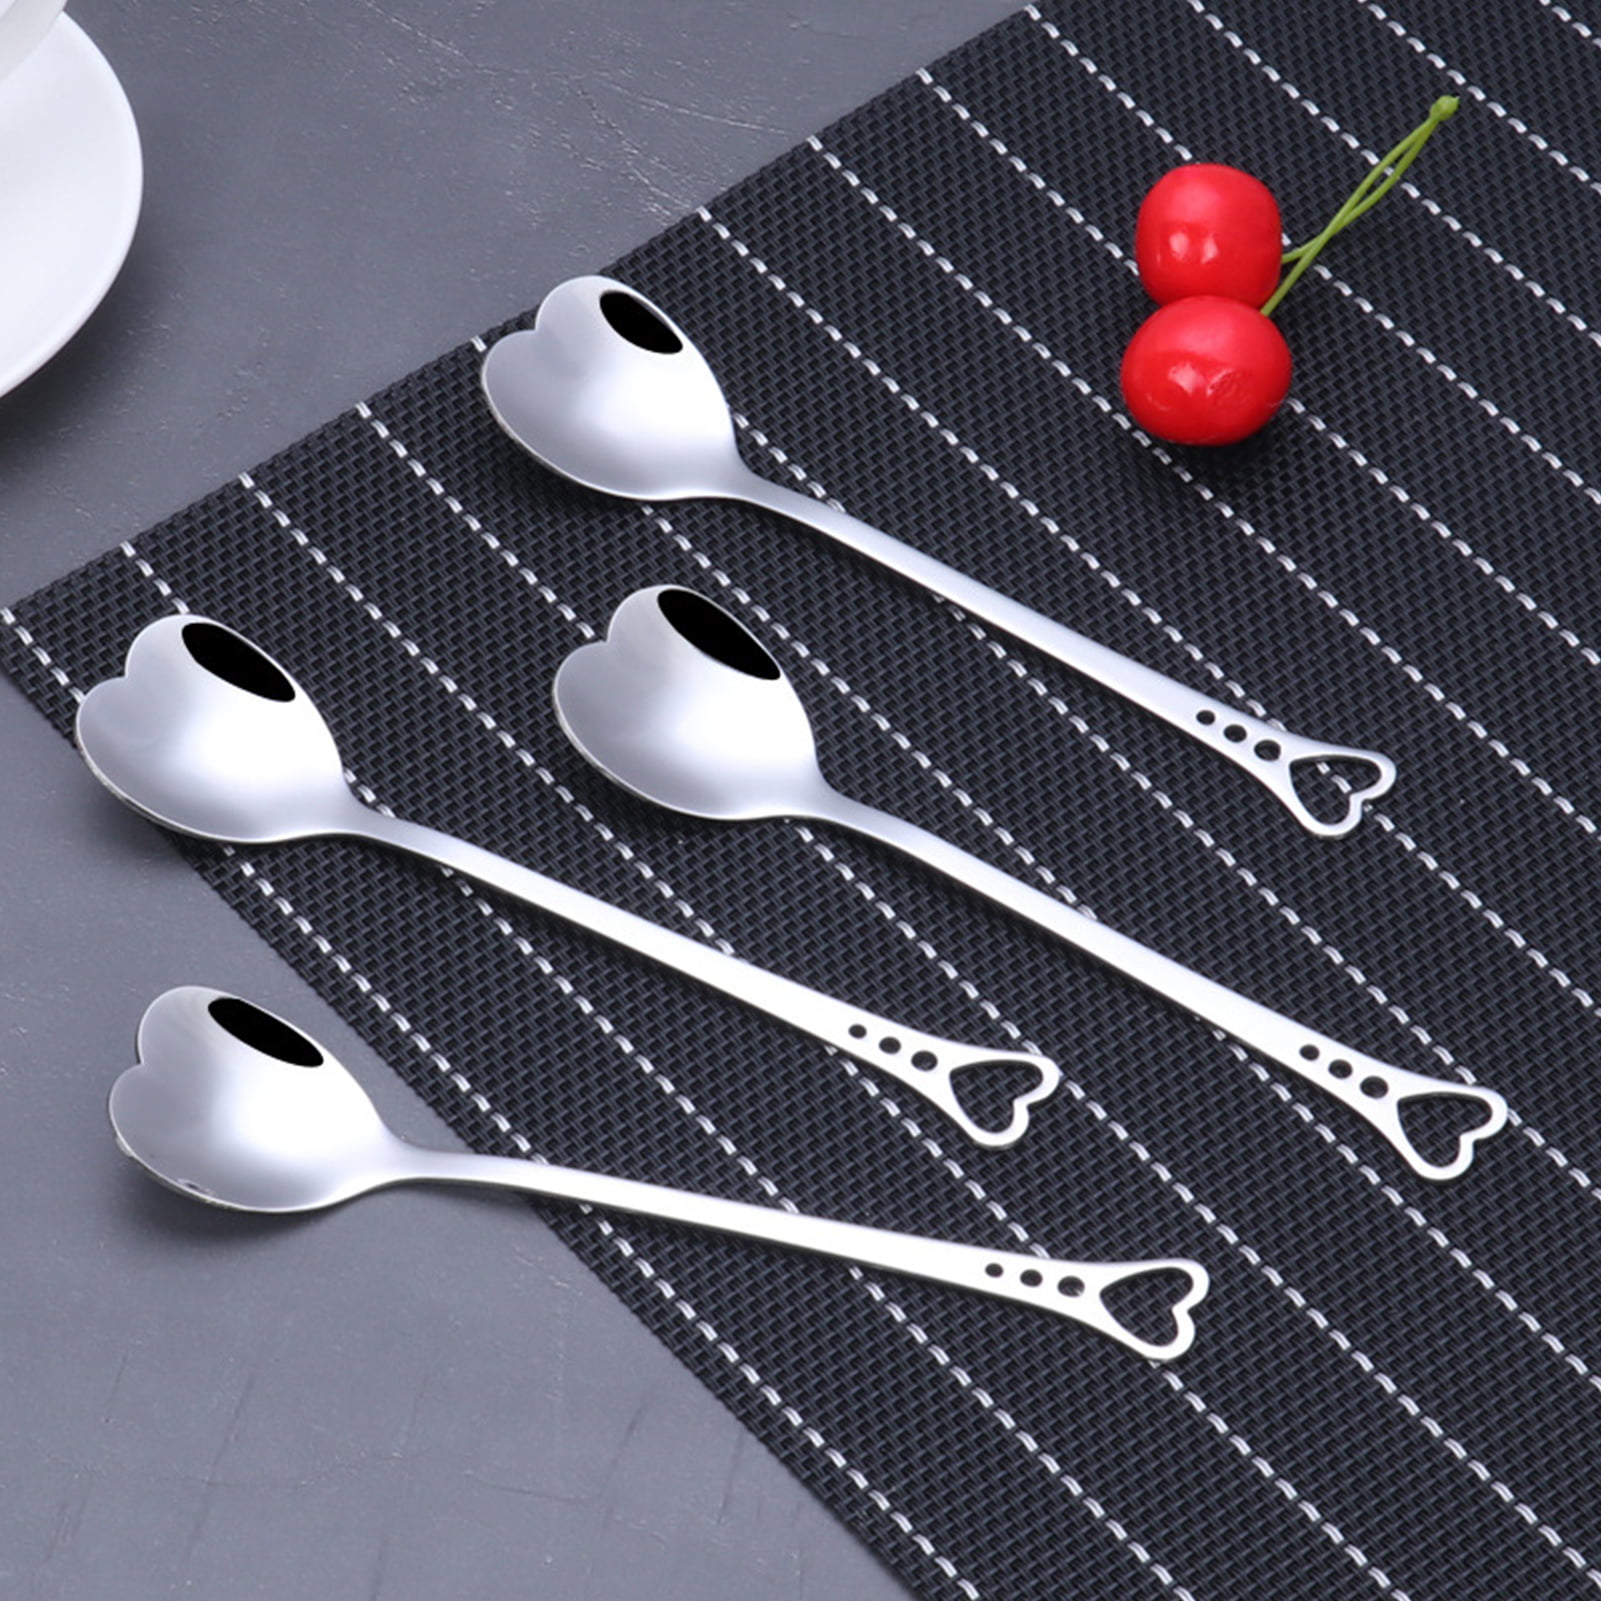 Terraneos Heart Shape Spoon 4 Piece 7X1.77 Inch Creative Big Spoon for Soup Ice Cream Tablespoons Scoop Caffe Tea Cake Rice Shooting Prop Mothers Day Decroratives Birthday Halloween Gifts 